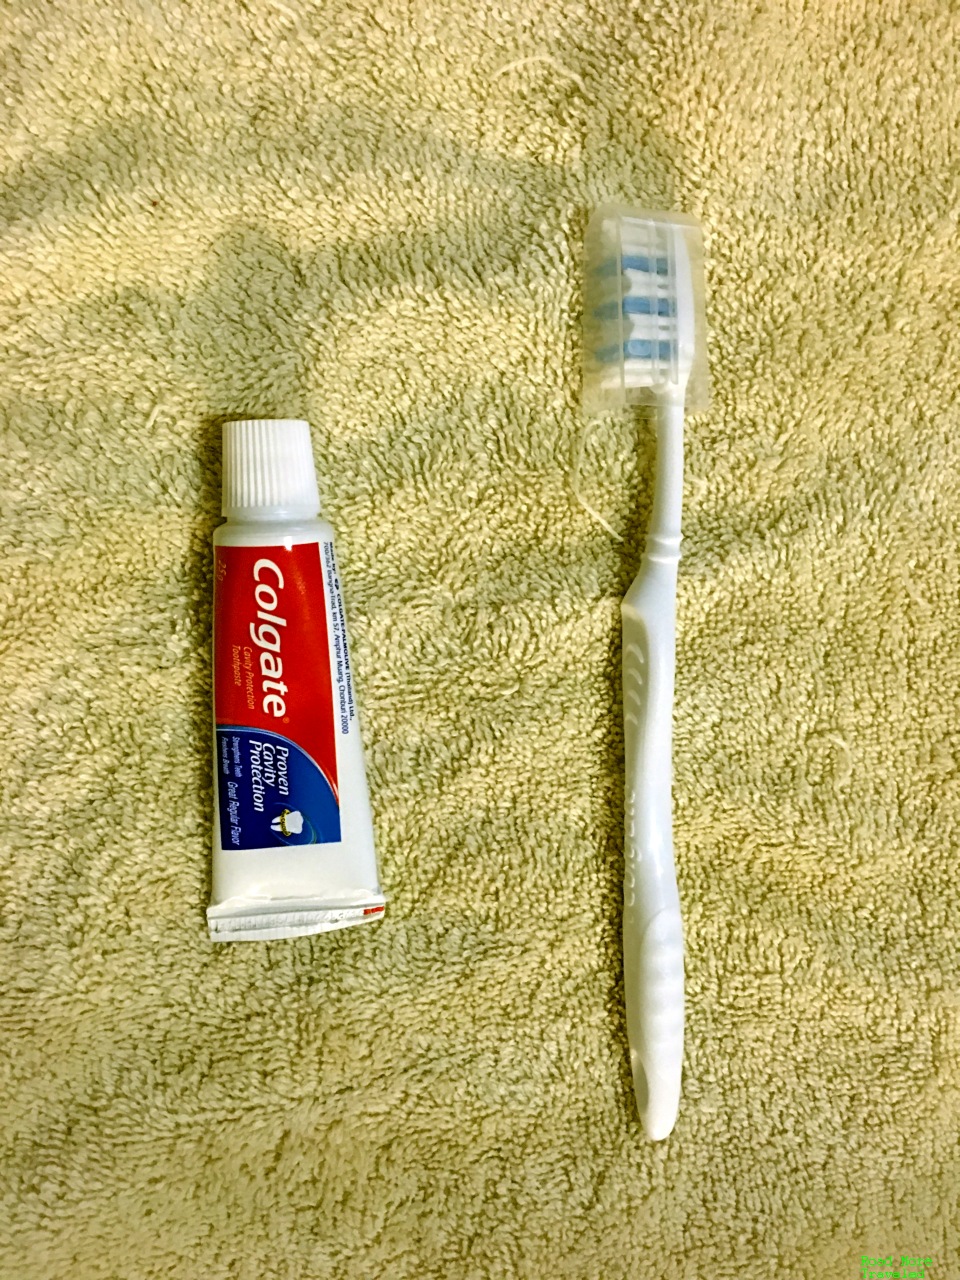 Amenity kit toothbrush and toothpaste